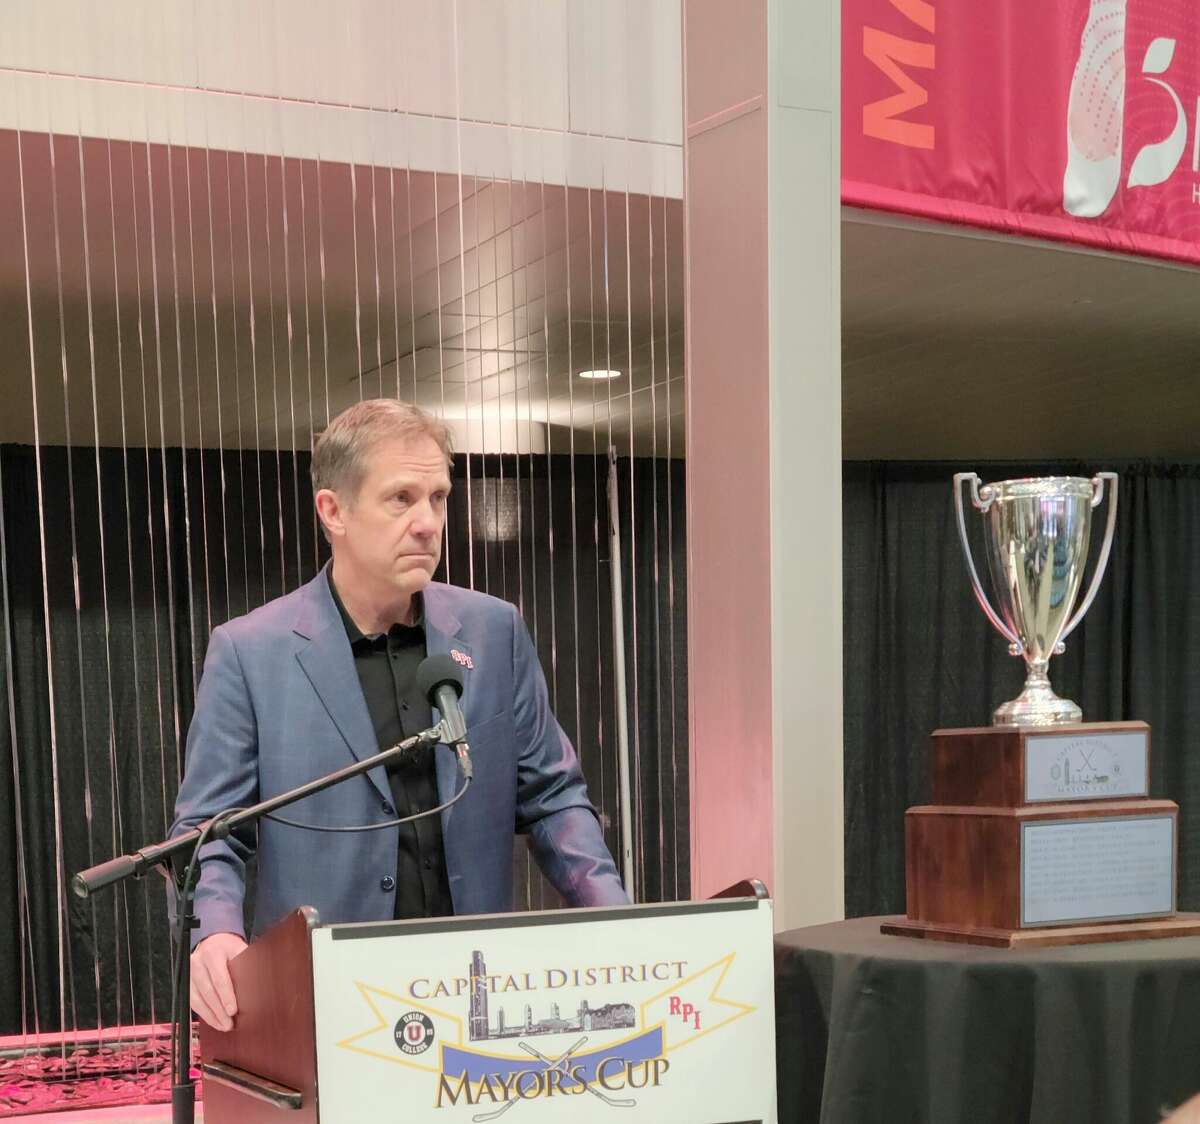 Under head coach Dave Smith, RPI has just one win in four Mayor’s Cup games with Union and the Engineers are looking forward to reclaiming the trophy.